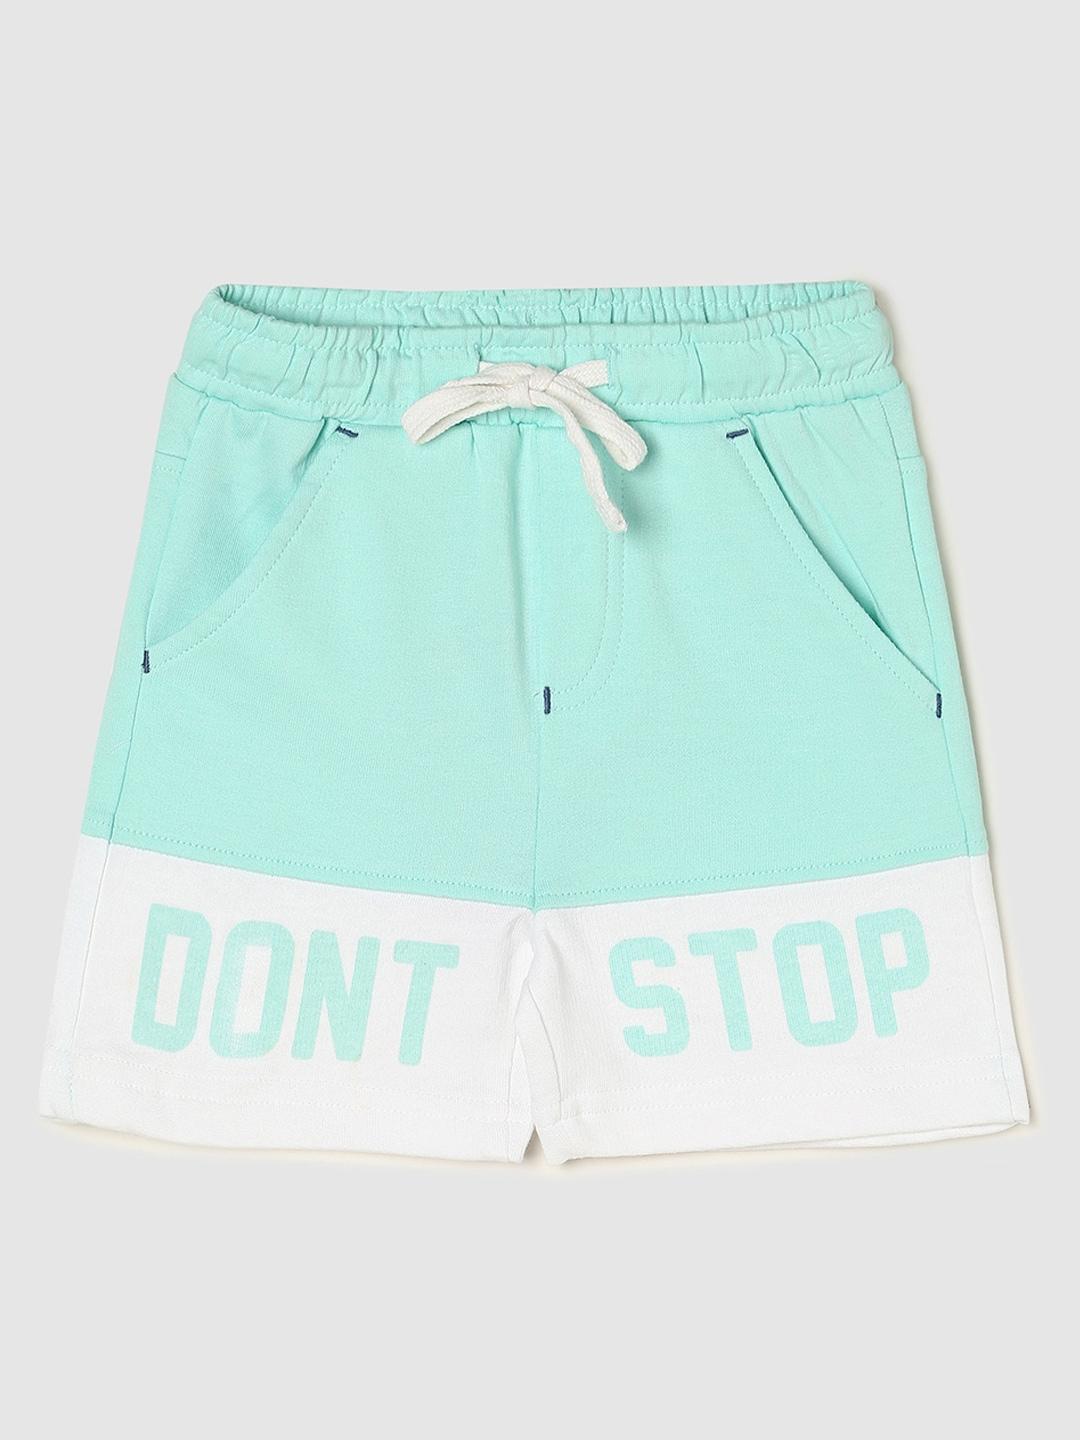 max-boys-typography-printed-mid-rise-pure-cotton-shorts